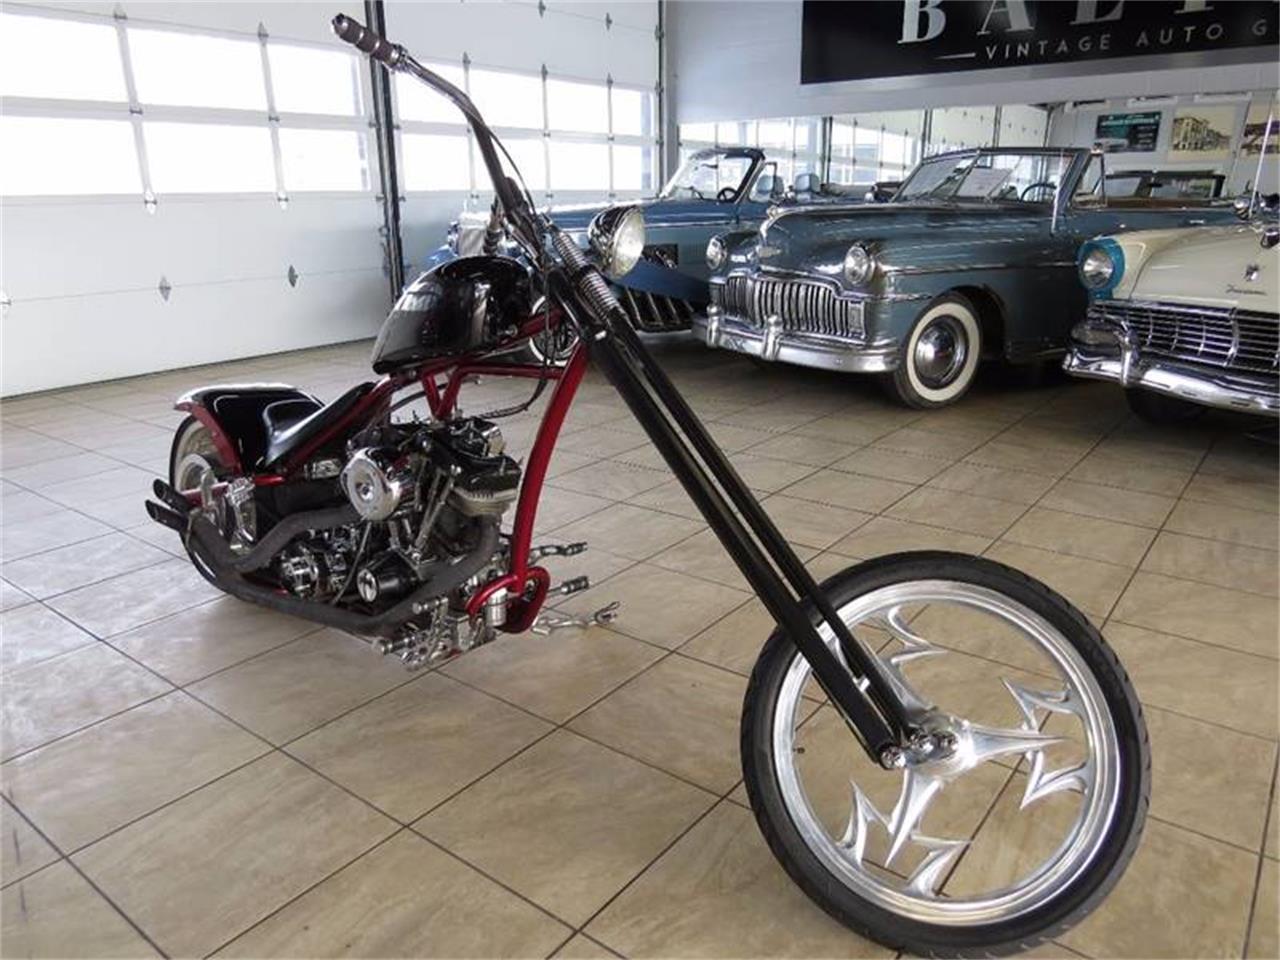 2012 Harley-Davidson Motorcycle for sale in St. Charles, IL